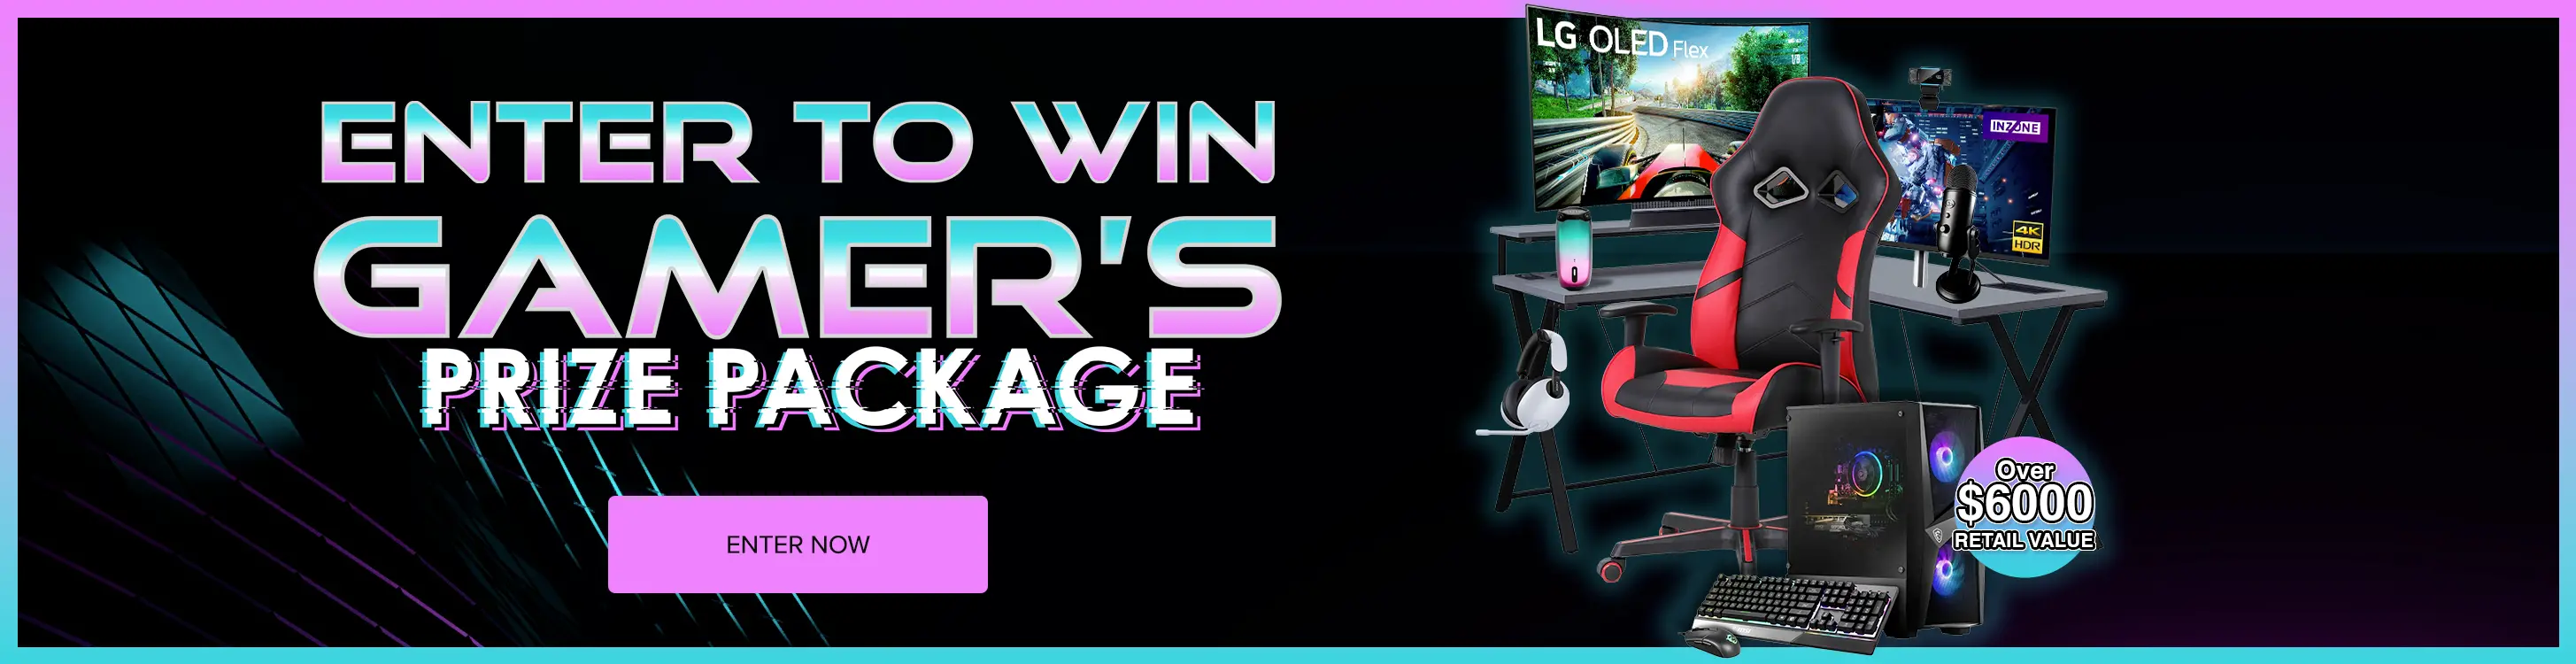 Enter to Win an Ultimate Gamer's Prize Package retail valued over $6000! Must be 18 Years or Older to Enter! Enter Now!